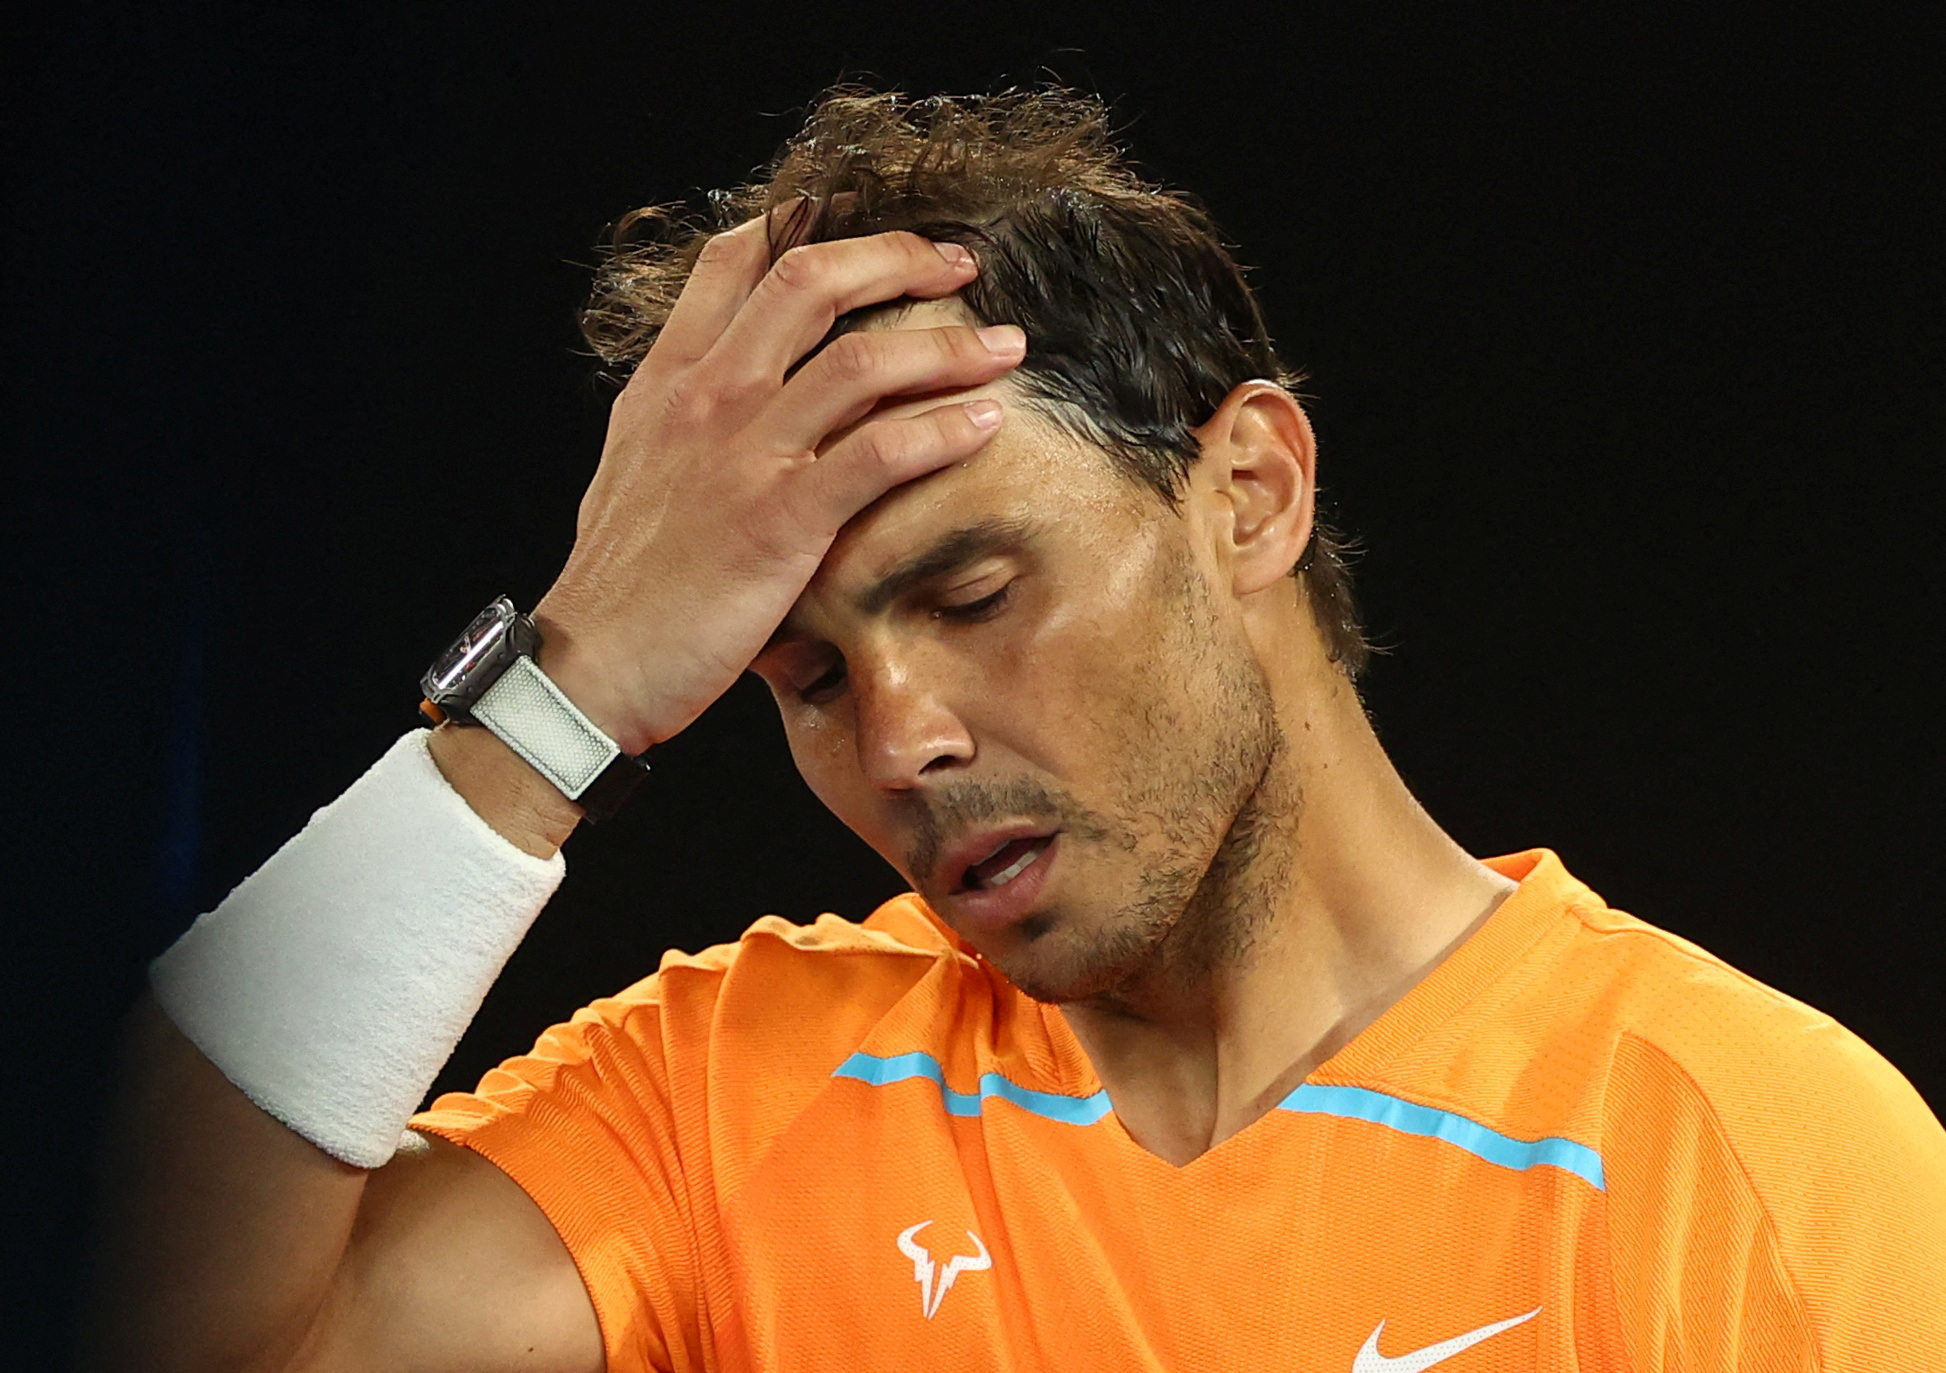 Profile of Rafa Nadal who will miss the French Open Reuters